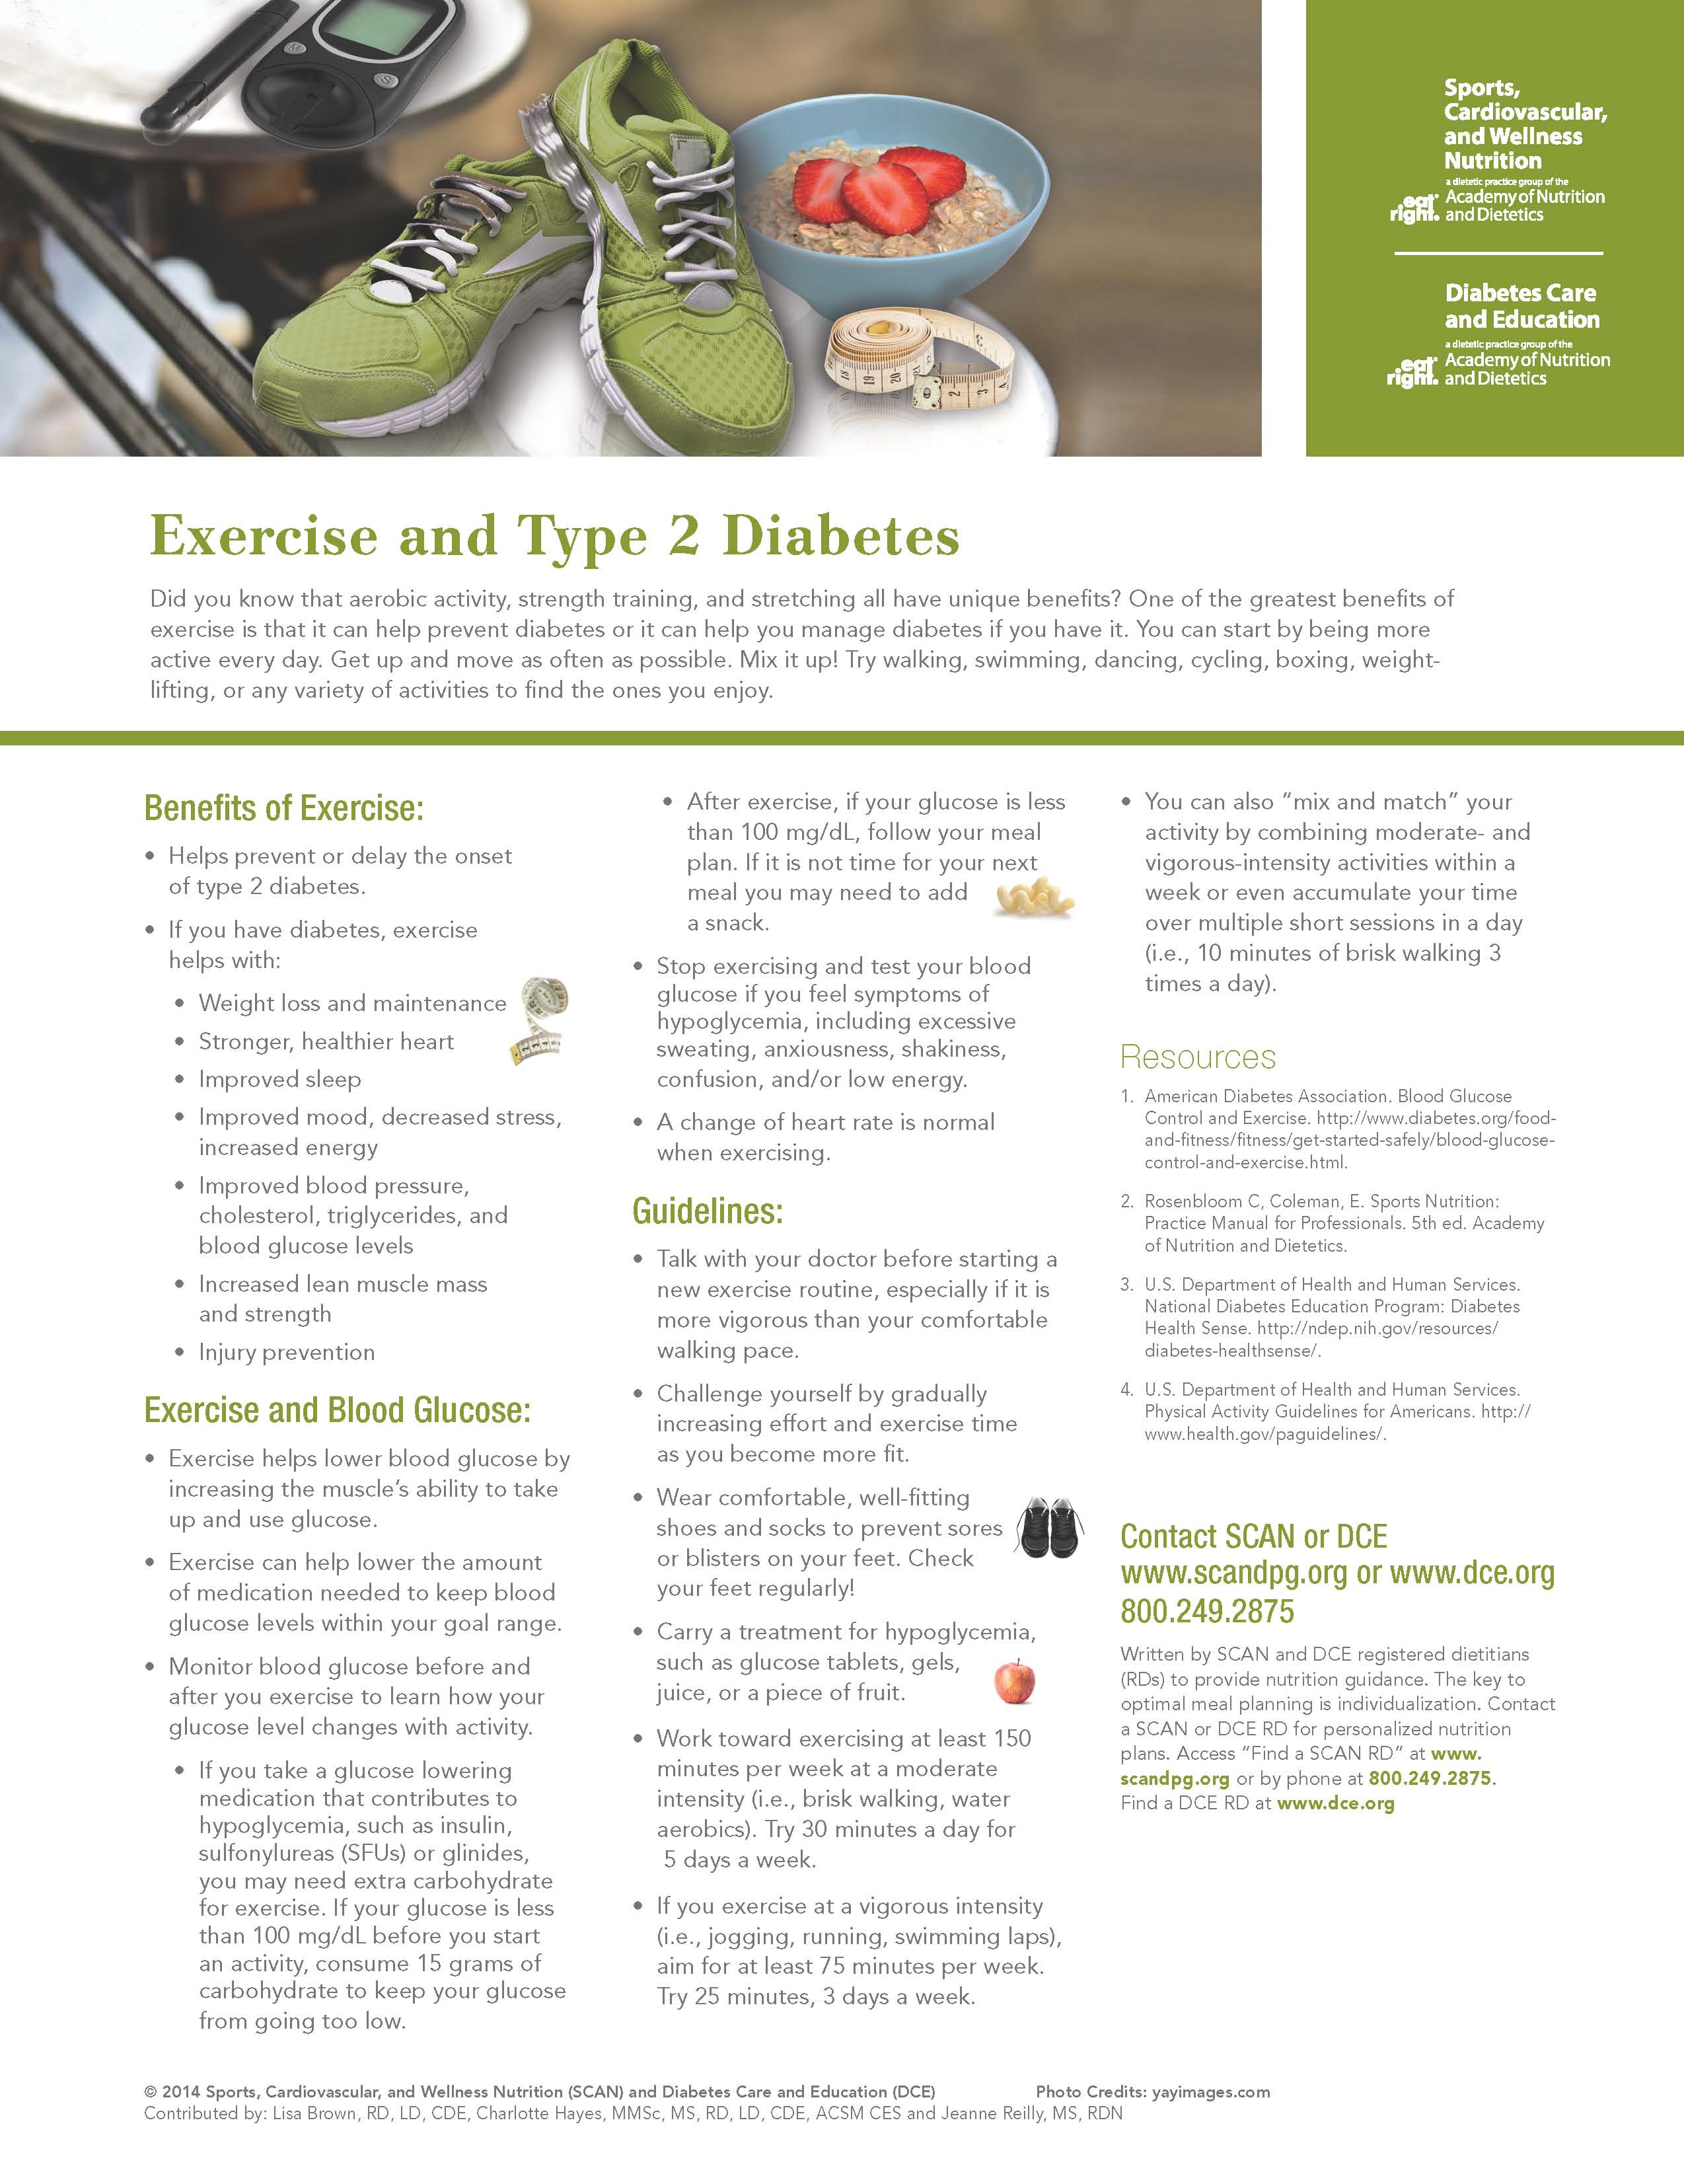 WCV Exercise and Type 2 Diabetes